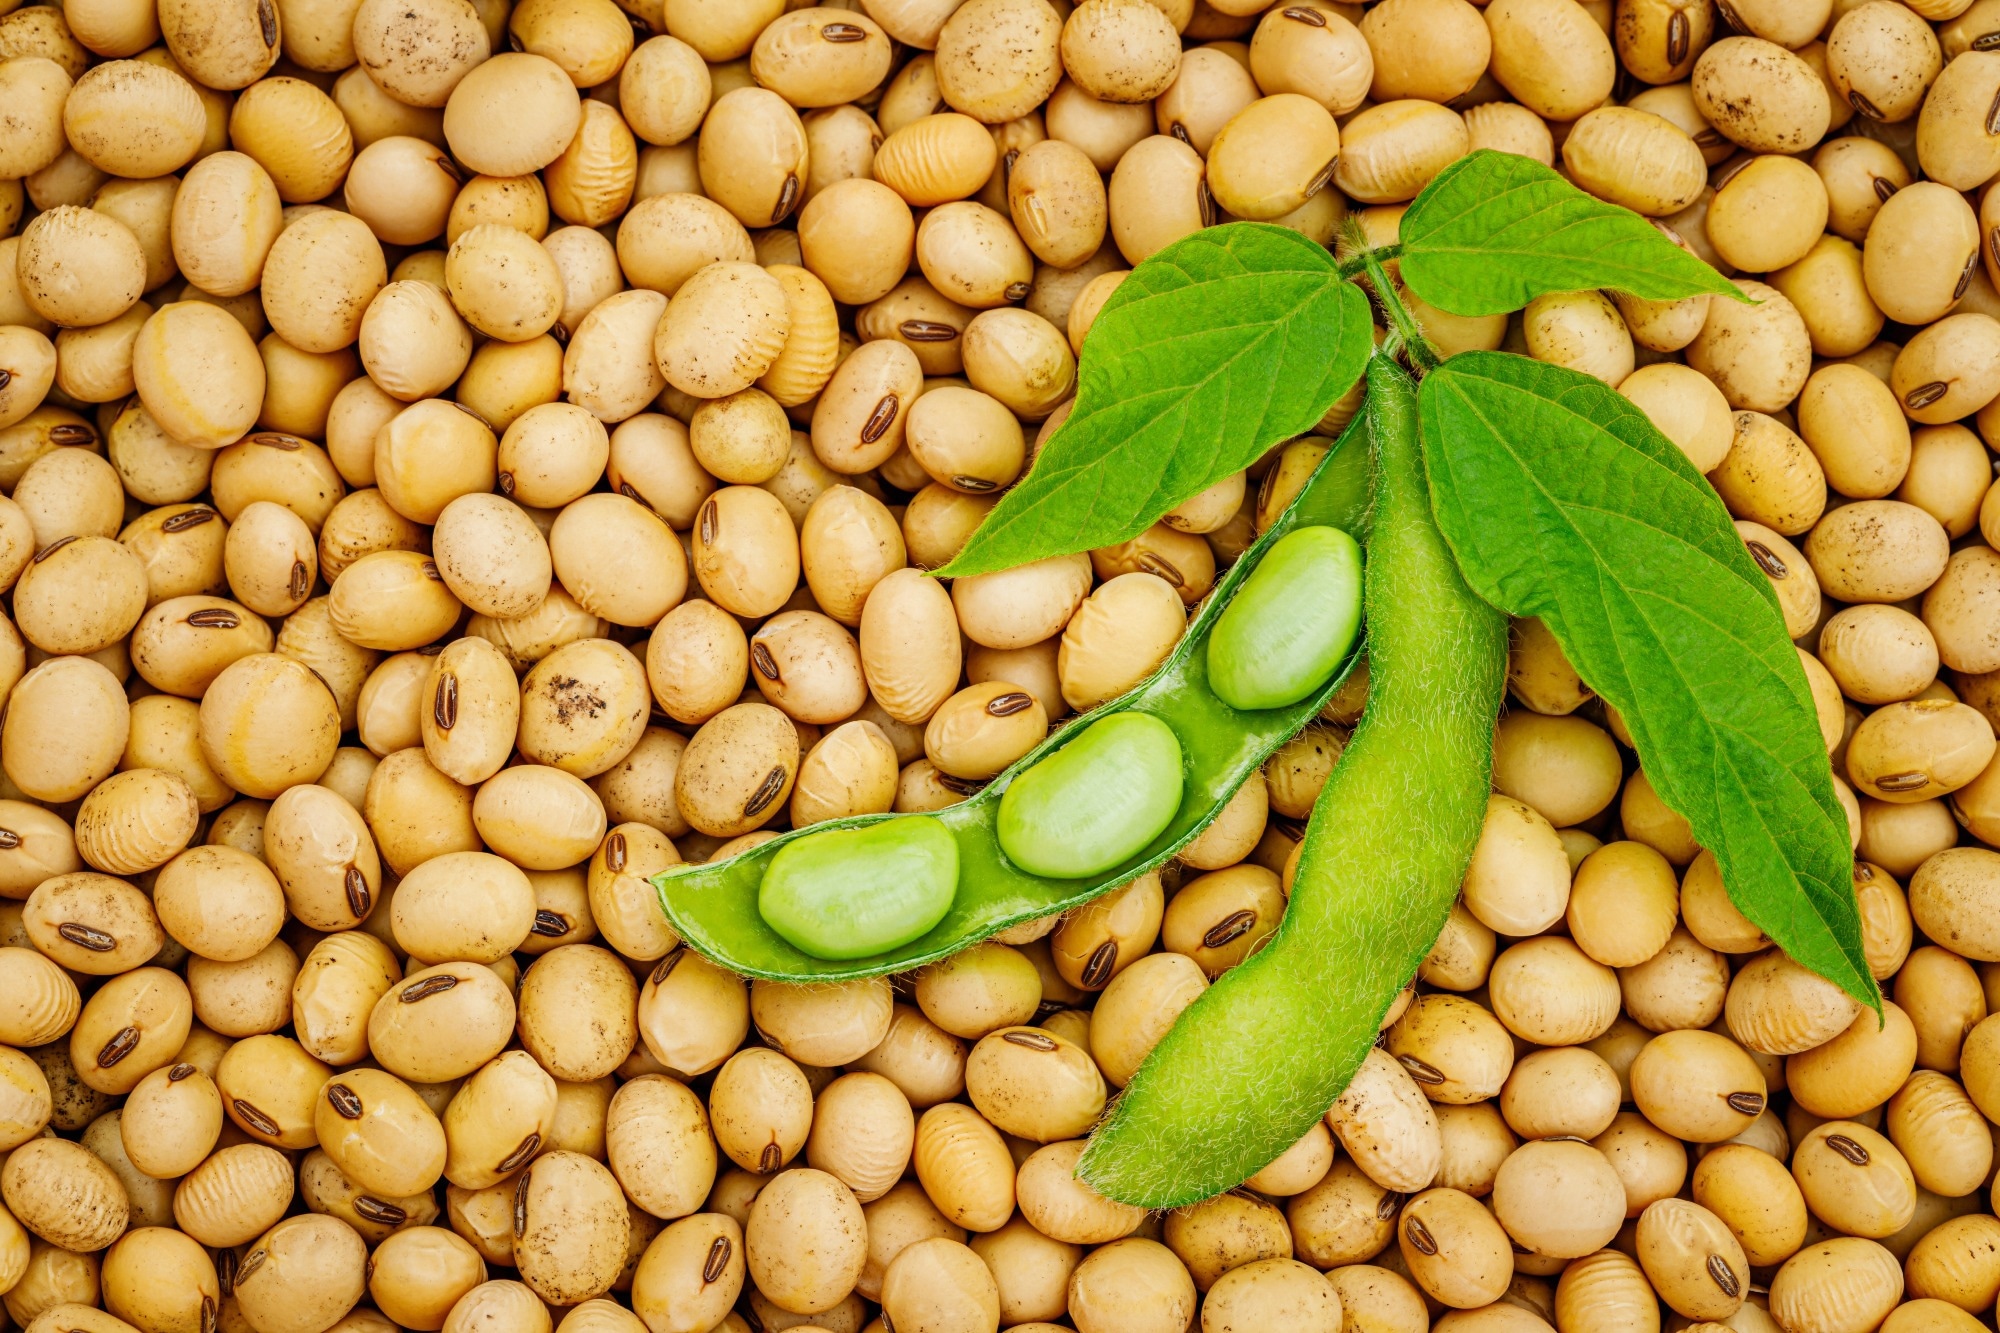 What are the gastrointestinal benefits of consuming soybean?